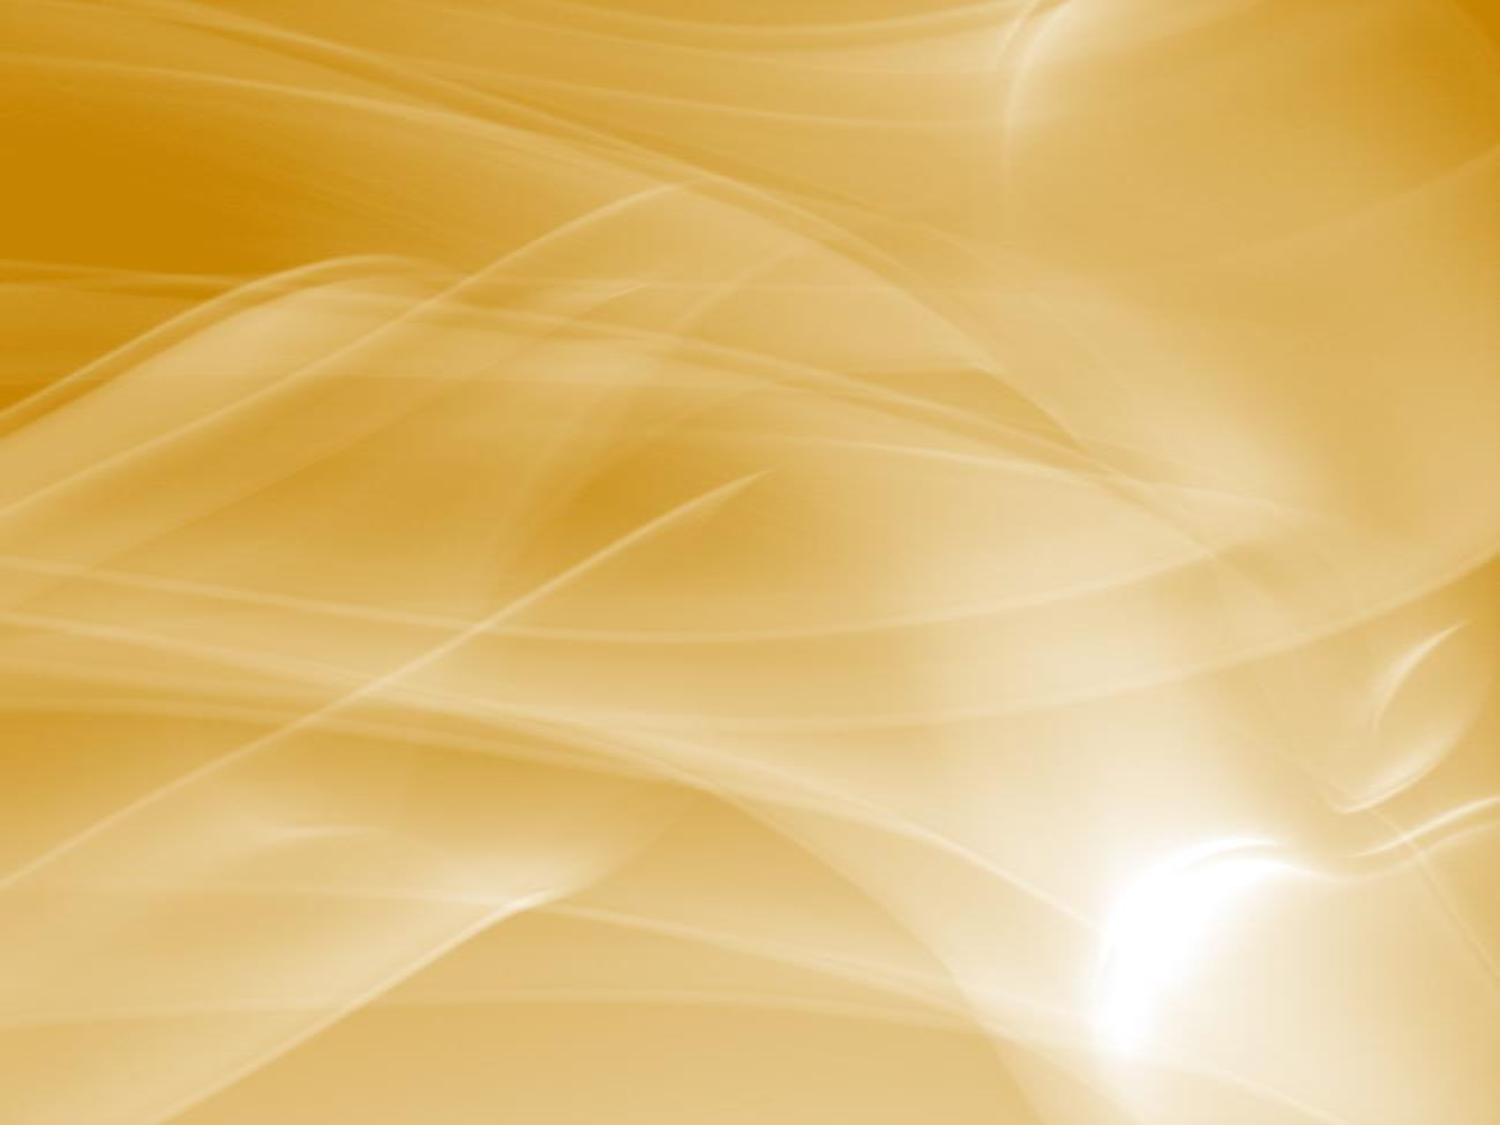  ppt background yellow gold ppt backgrounds yellow Car Pictures